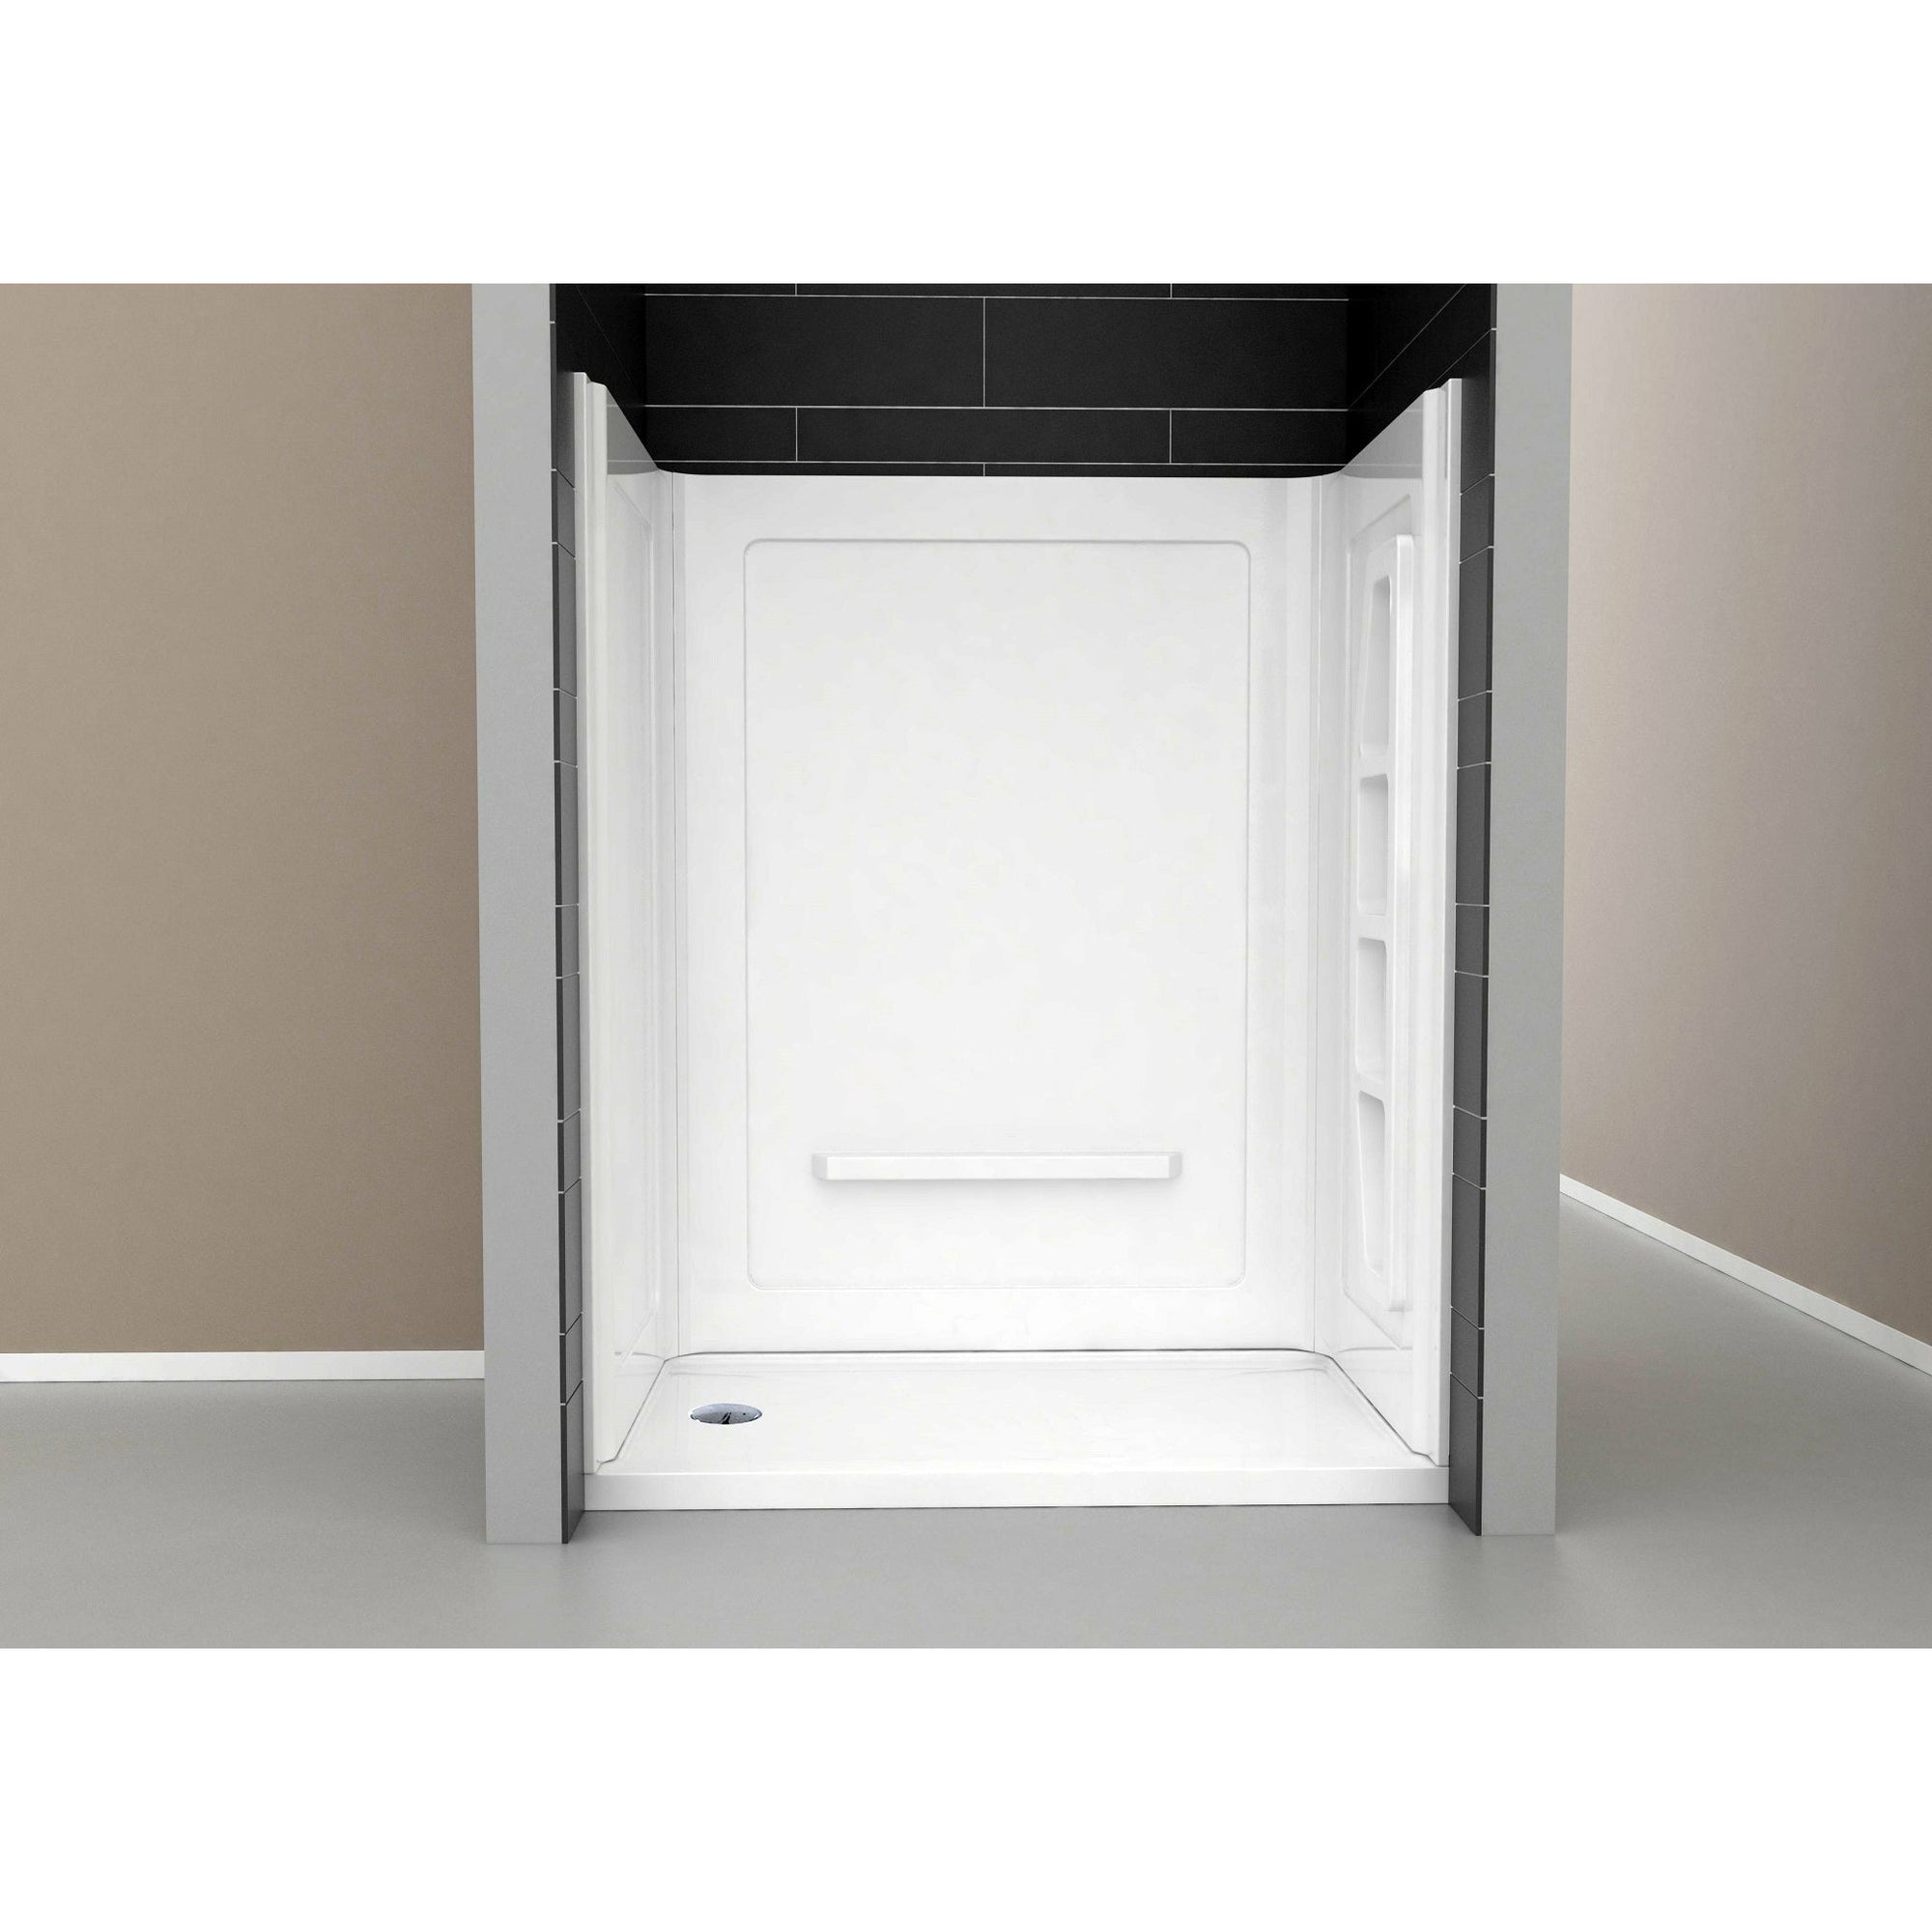 Anzzi Forum 48 in. x 36 in. x 74 in. 3-piece DIY Friendly Alcove Shower Surround with Built-in Shelves in White SW-AZ011WH - Vital Hydrotherapy